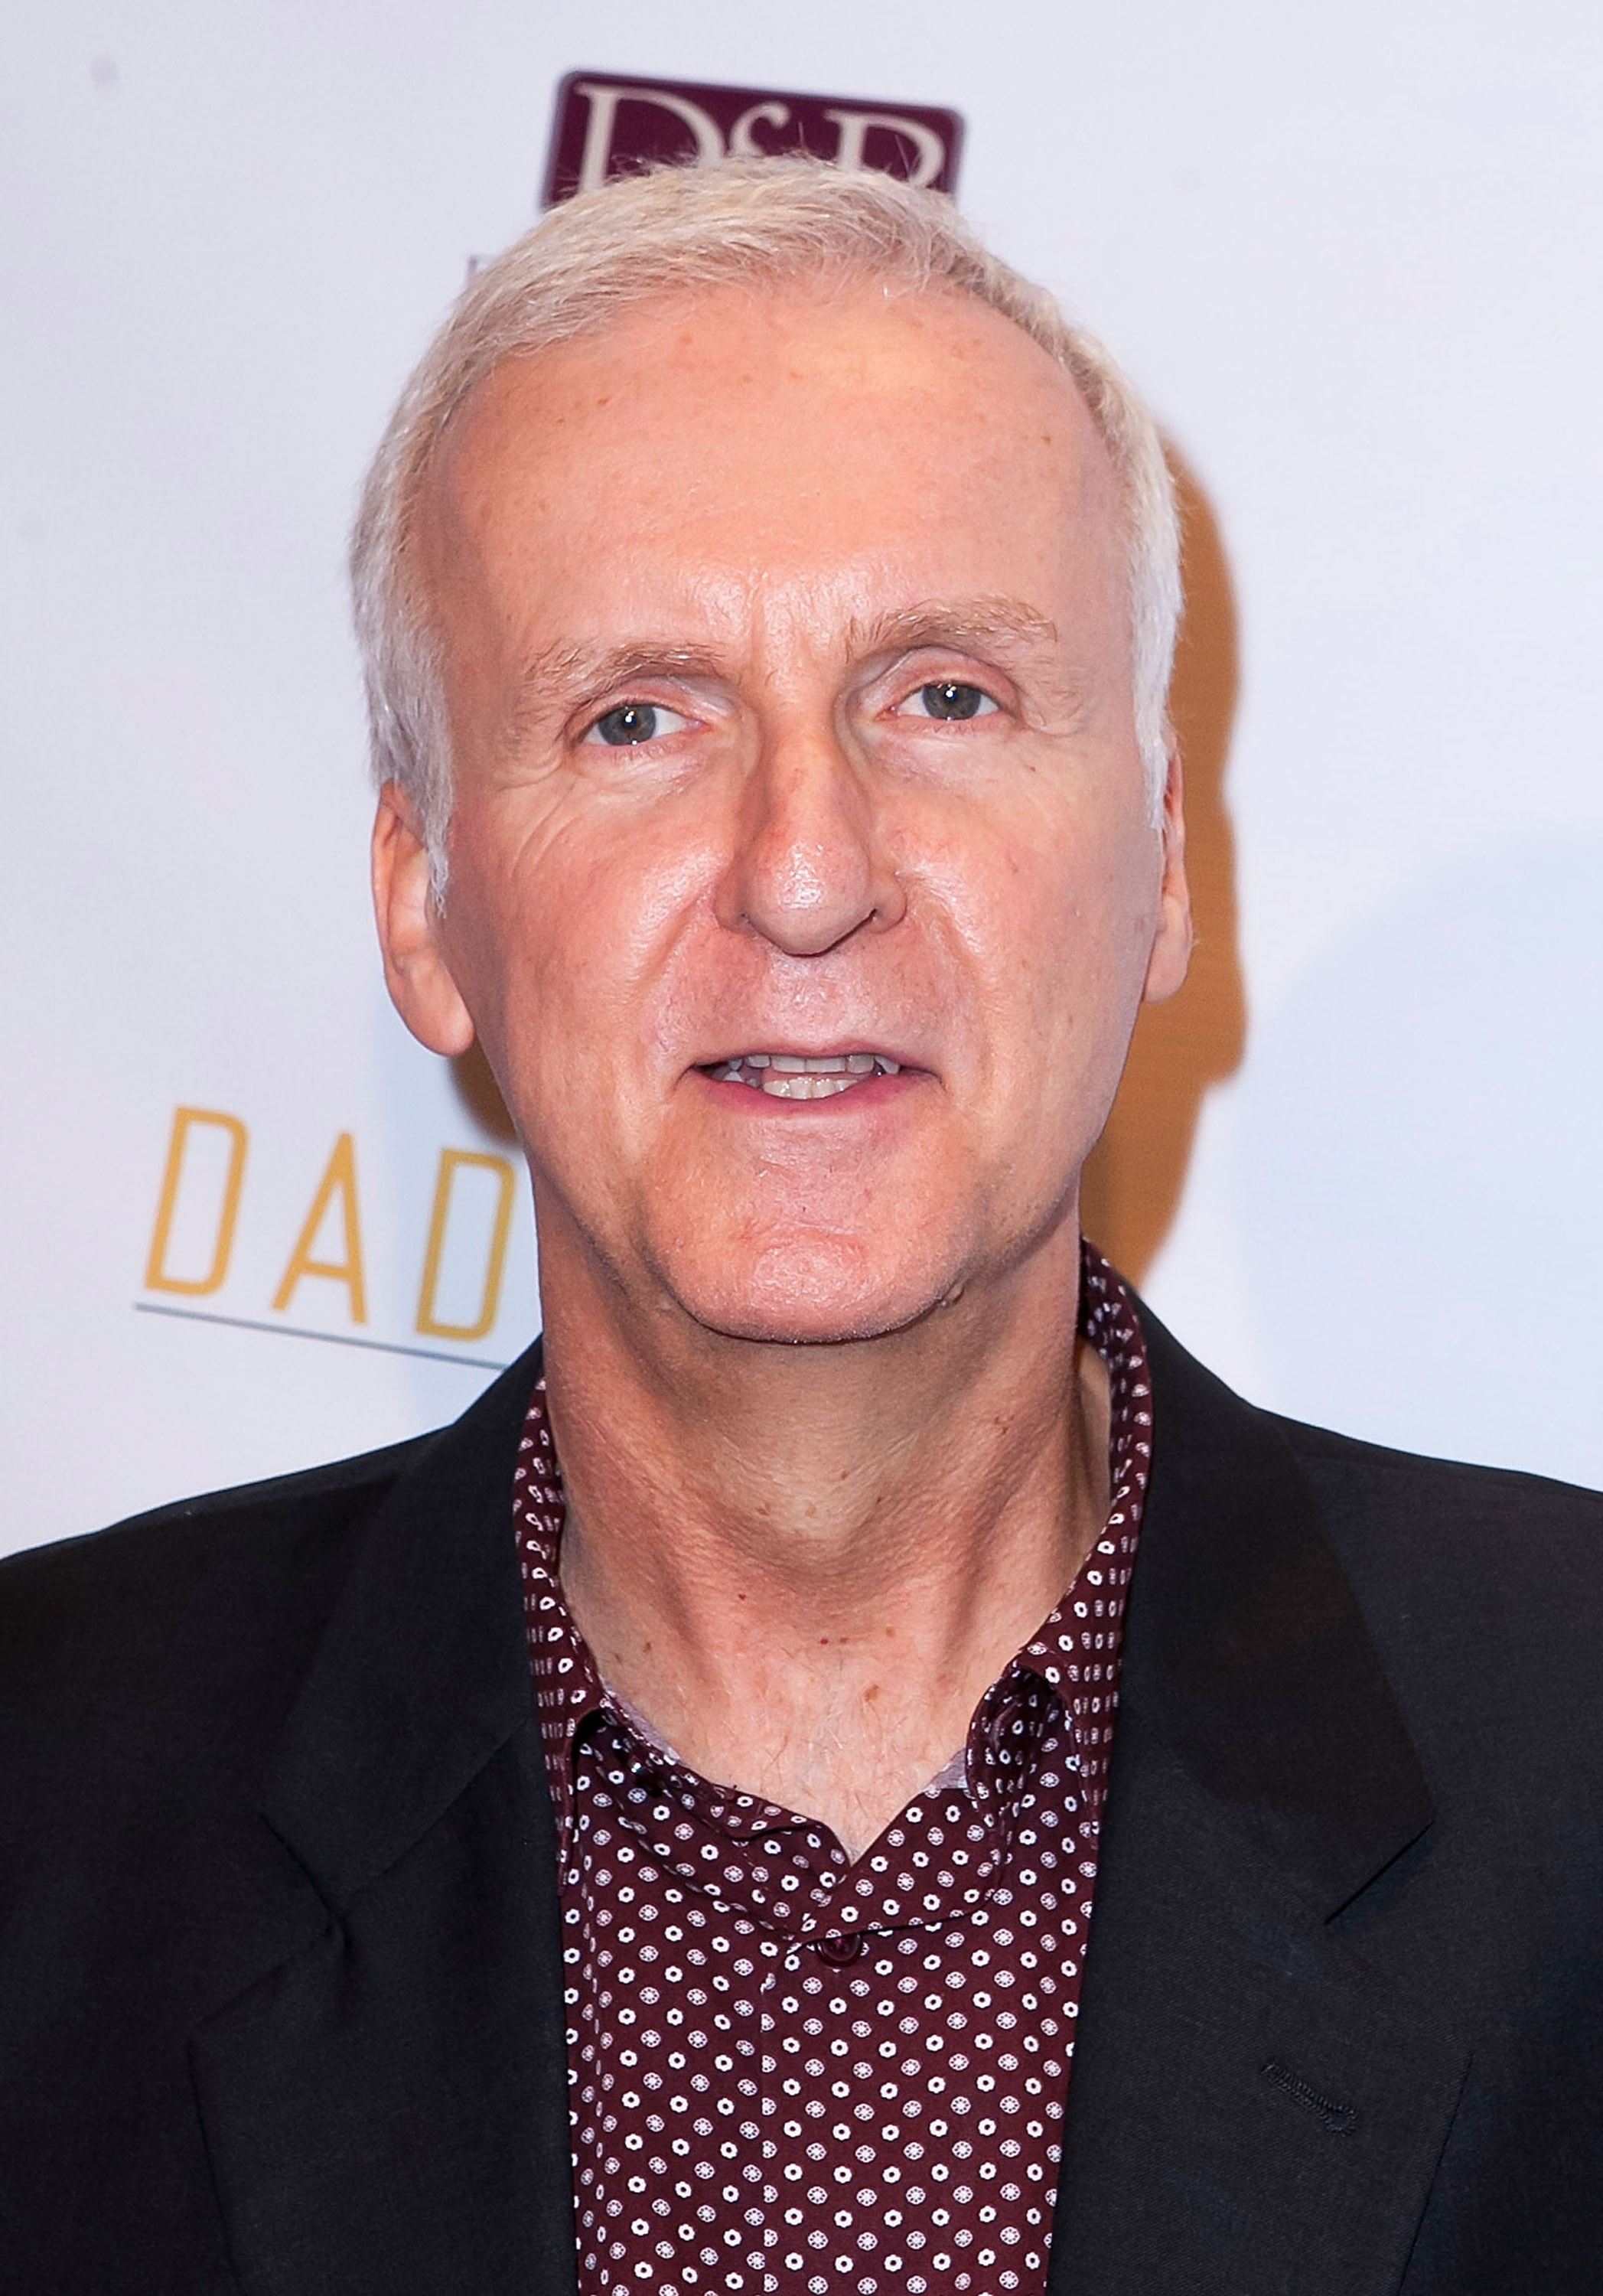 James Cameron arrives for the Premiere Of "All You Need Is Love" - Arrivals at Ray Kurtzman Theater on October 29, 2014 in Los Angeles, California. (Gabriel Olsen—Getty Images)